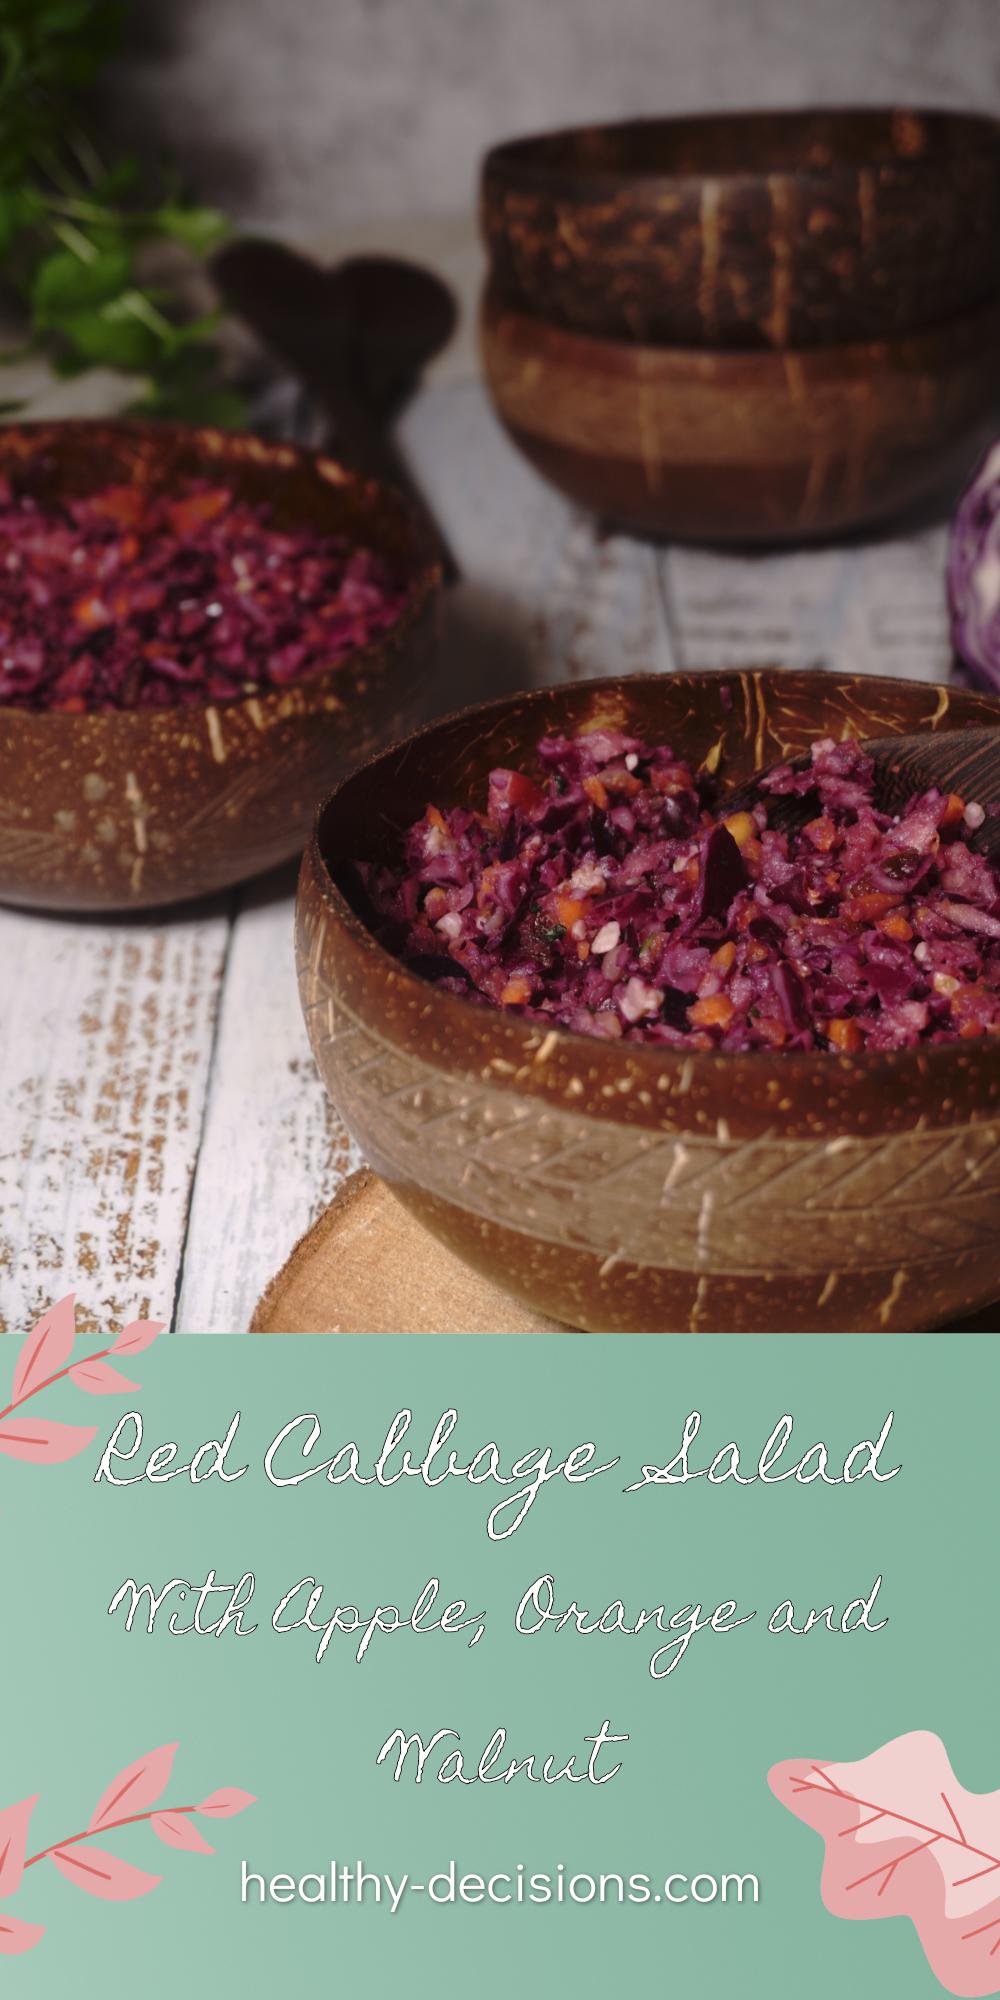 Red Cabbage Salad With Apple, Orange and Walnut 15